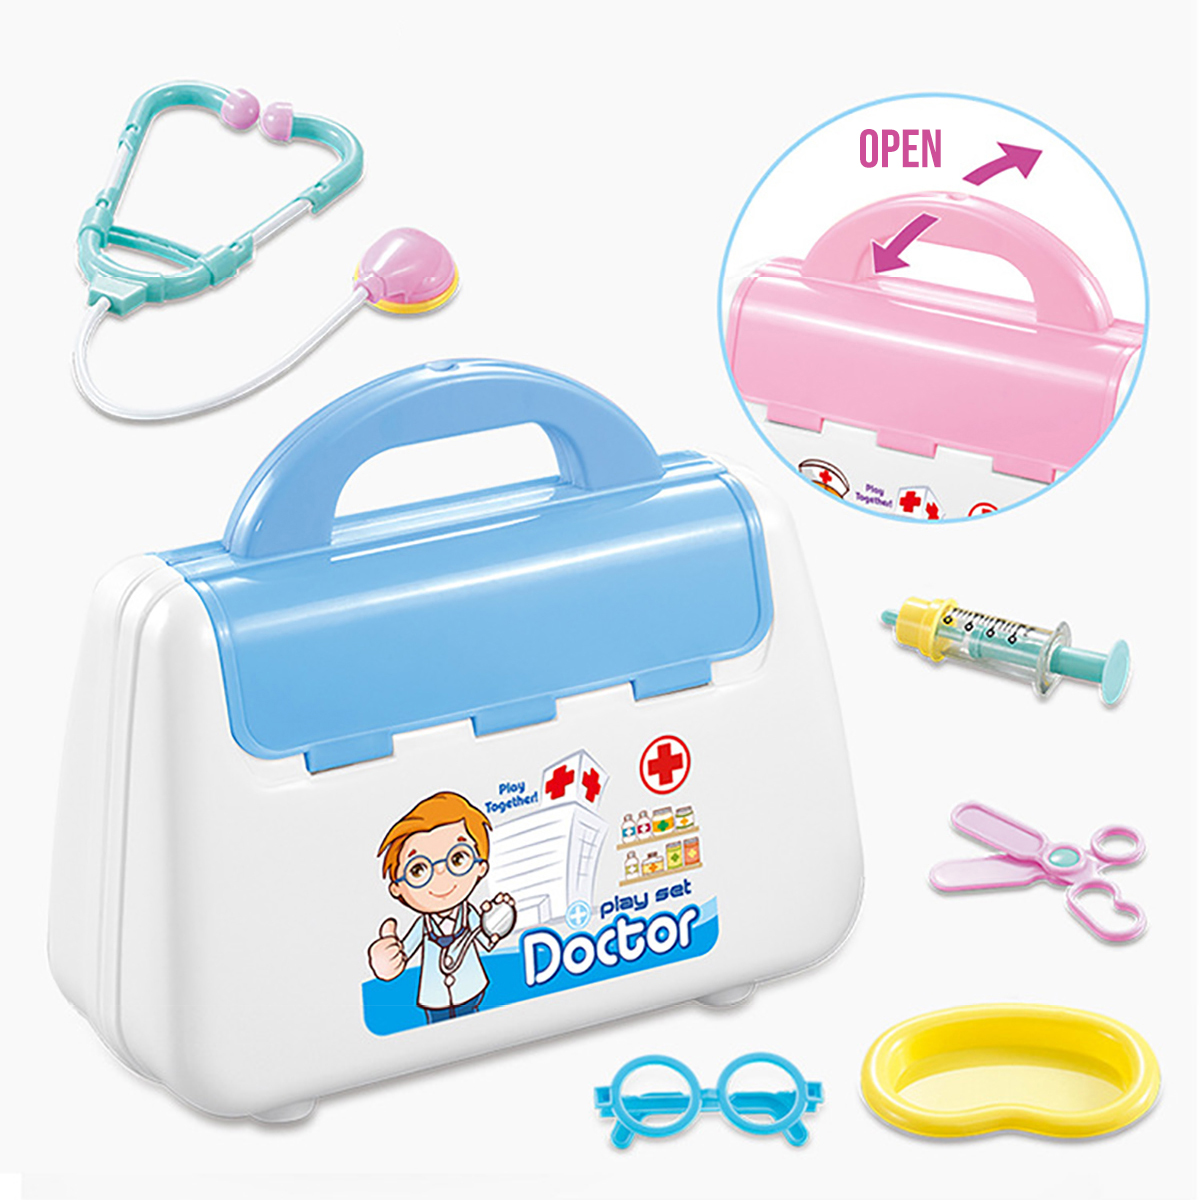 Simulation-Pretend-Doctor-Nurse-Role-Play-Education-Toy-Set-with-Carrying-Box-for-Kids-Gift-1725291-6